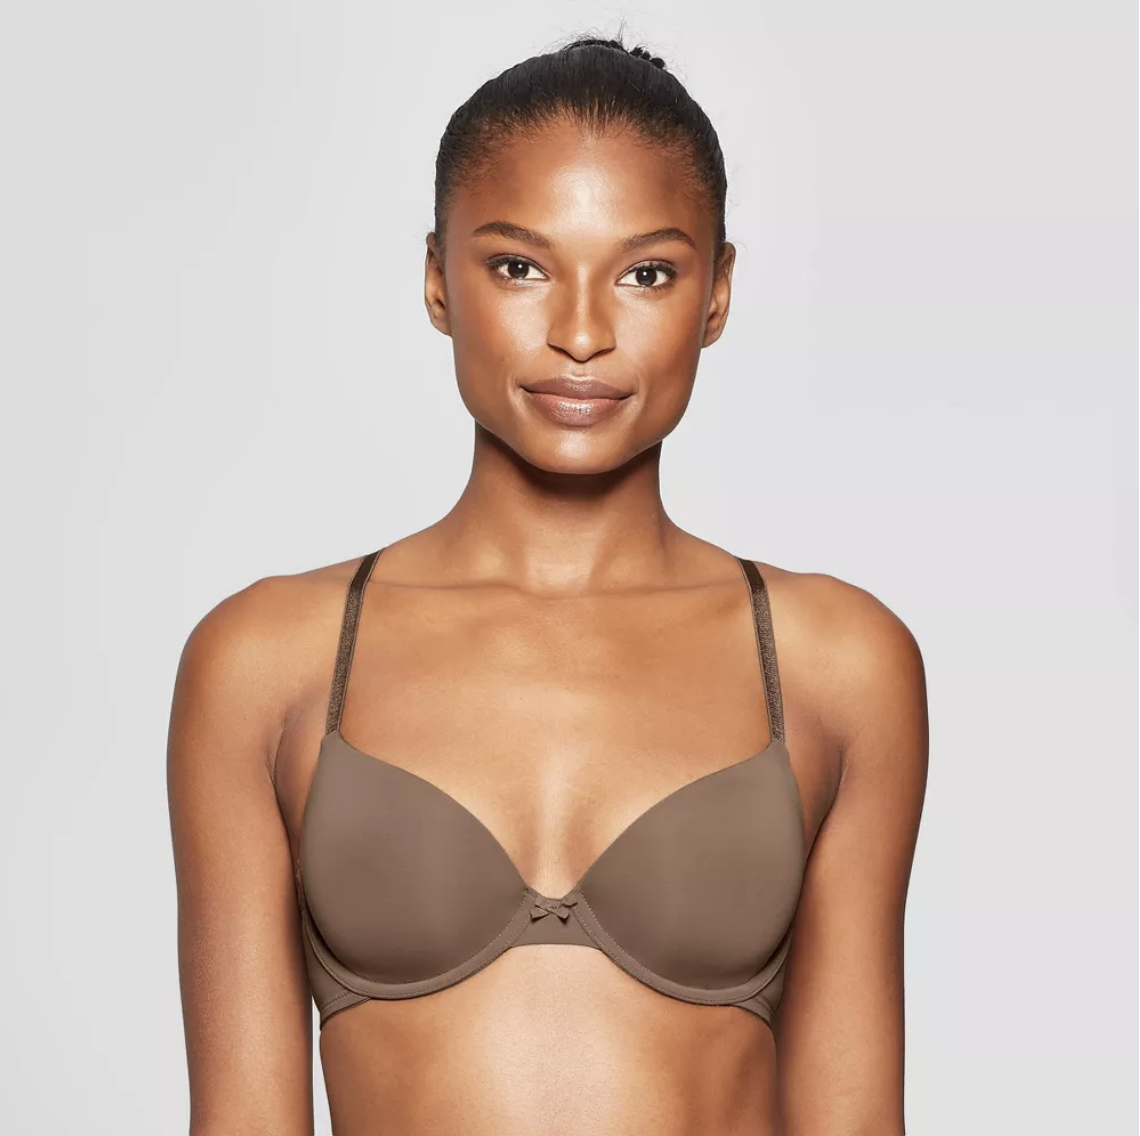 model wearing a plain, smooth-cupped bra